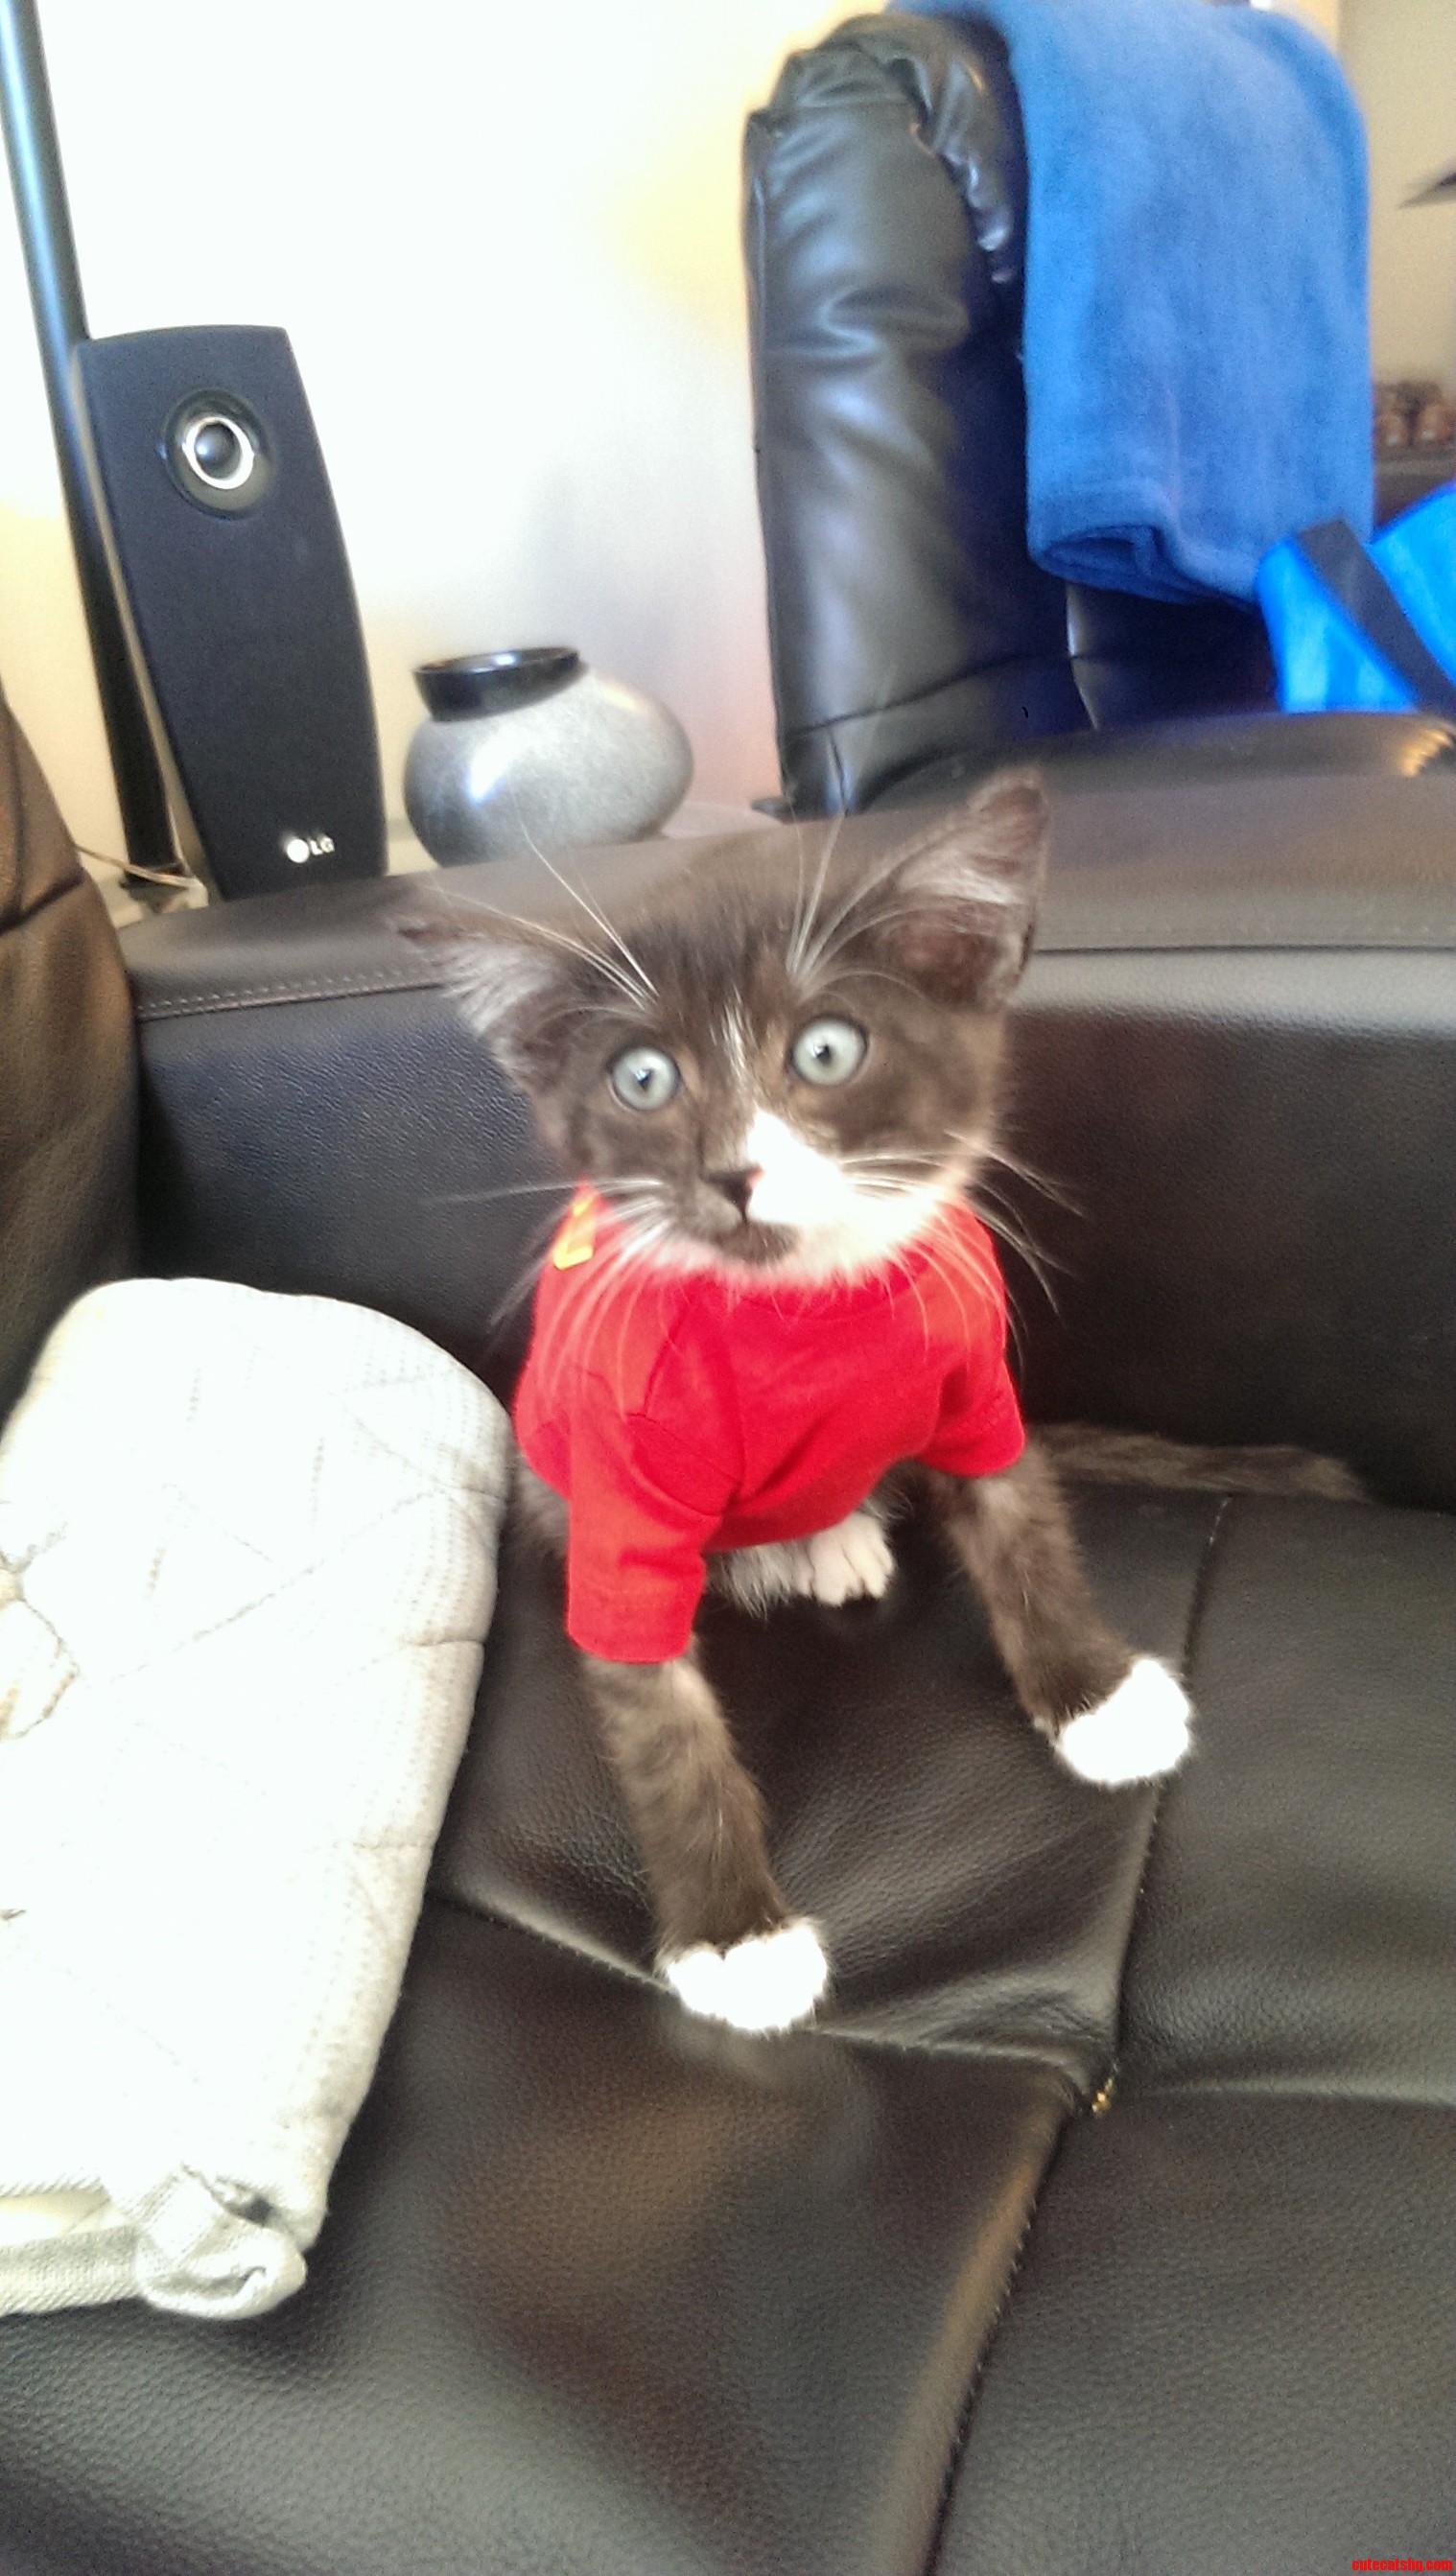 Our cats reaction to wearing a shirt for the first time